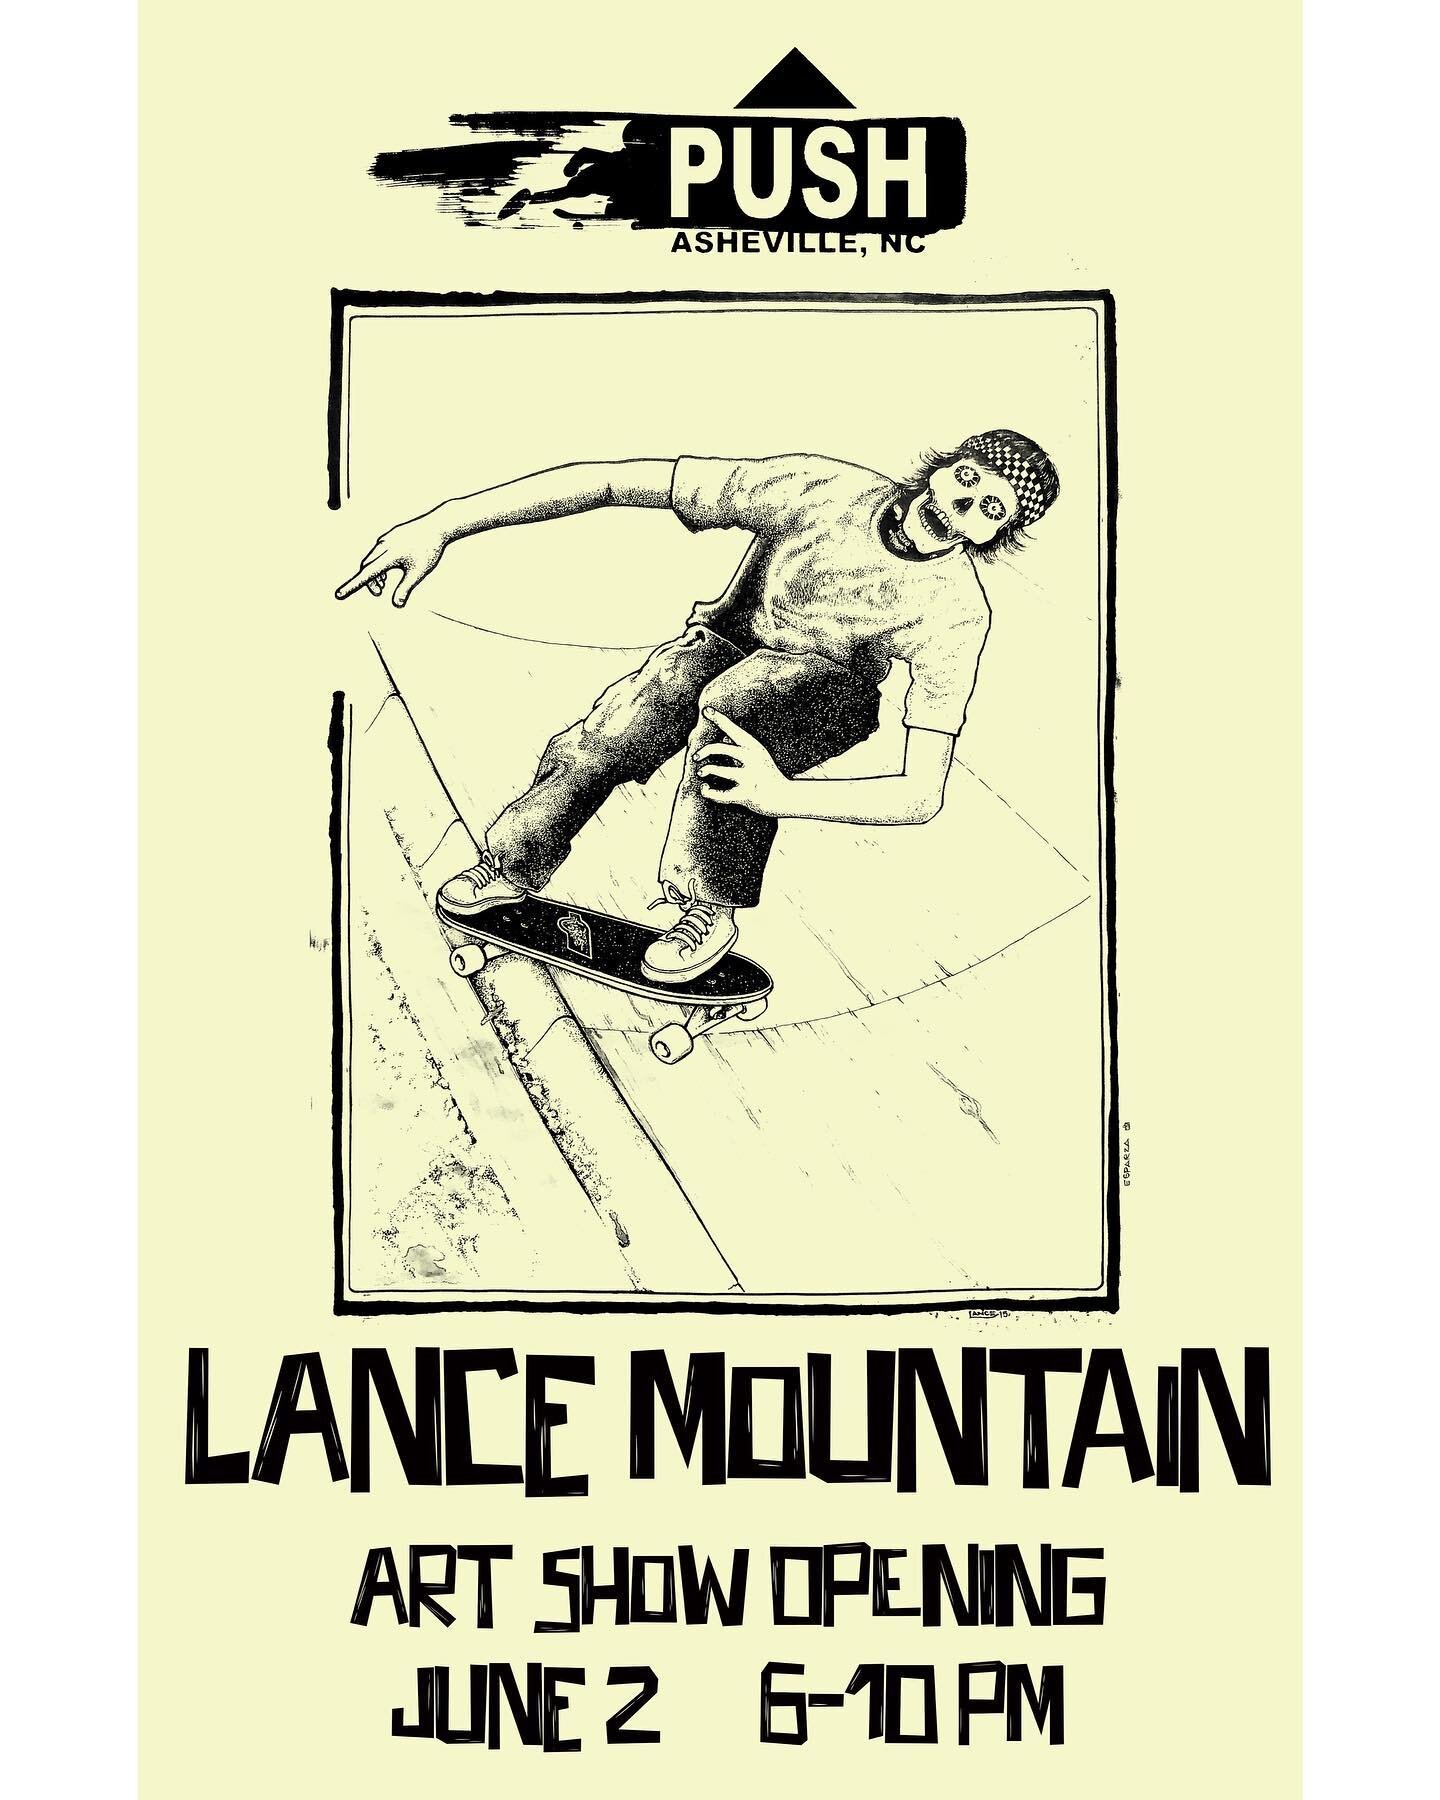 The Asheville Skate Foundation nonprofit, @foundationasheville and @pushskateshop are keeping the good times rolling for us all!!

We&rsquo;re proud to announce the upcoming @lancemountain solo art show in the PUSH Skateshop gallery on Friday June 2n